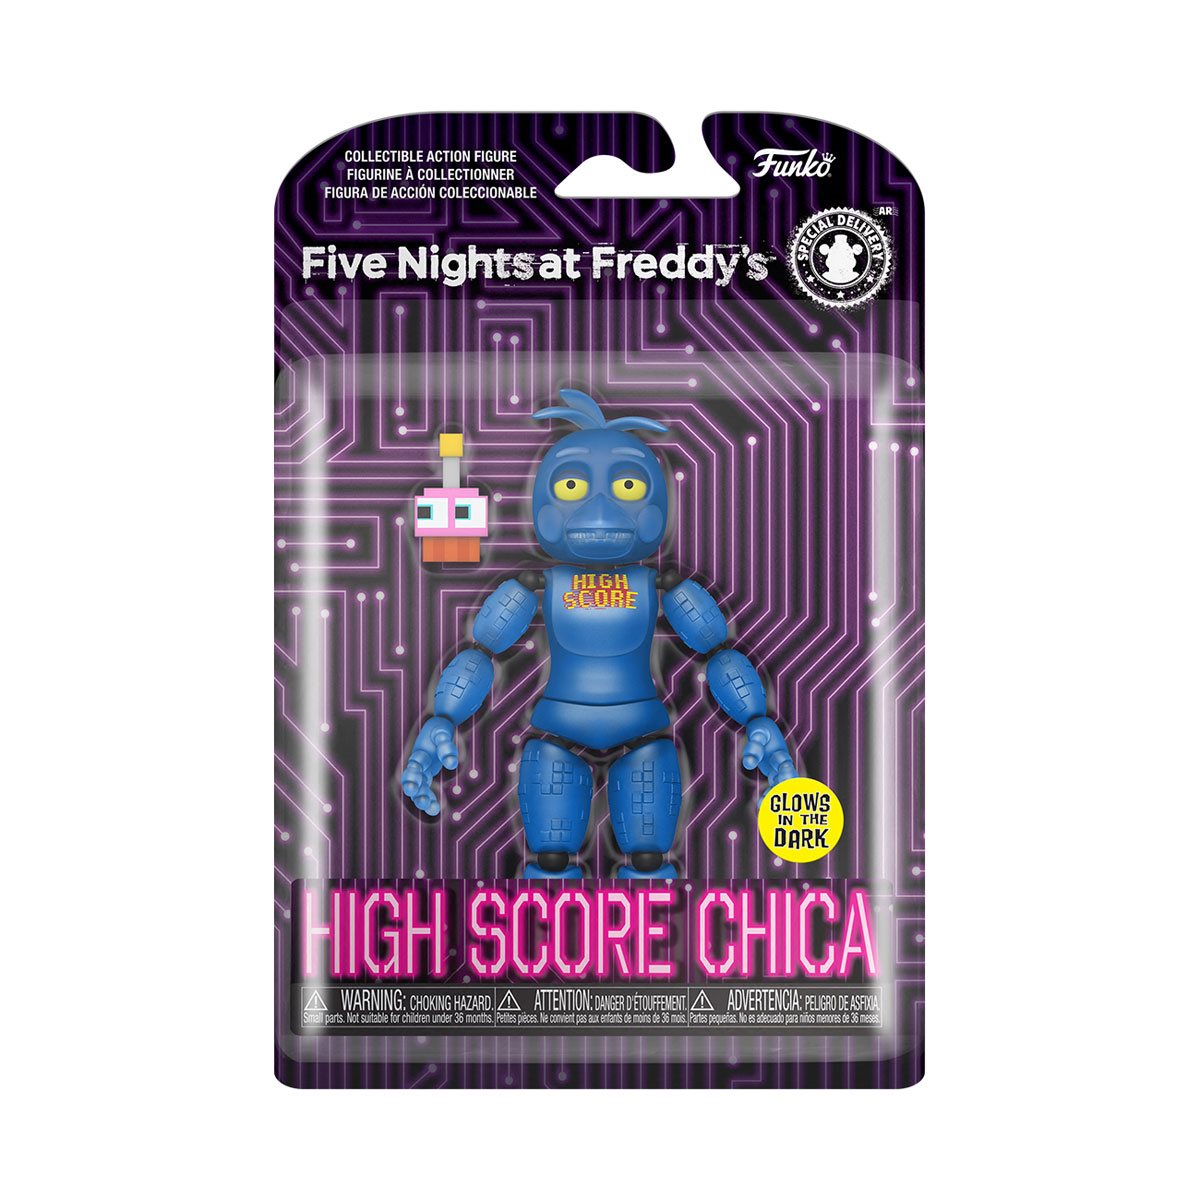 Funko Five Nights At Freddy's Snap: Nightmare Chica & Toy Chica